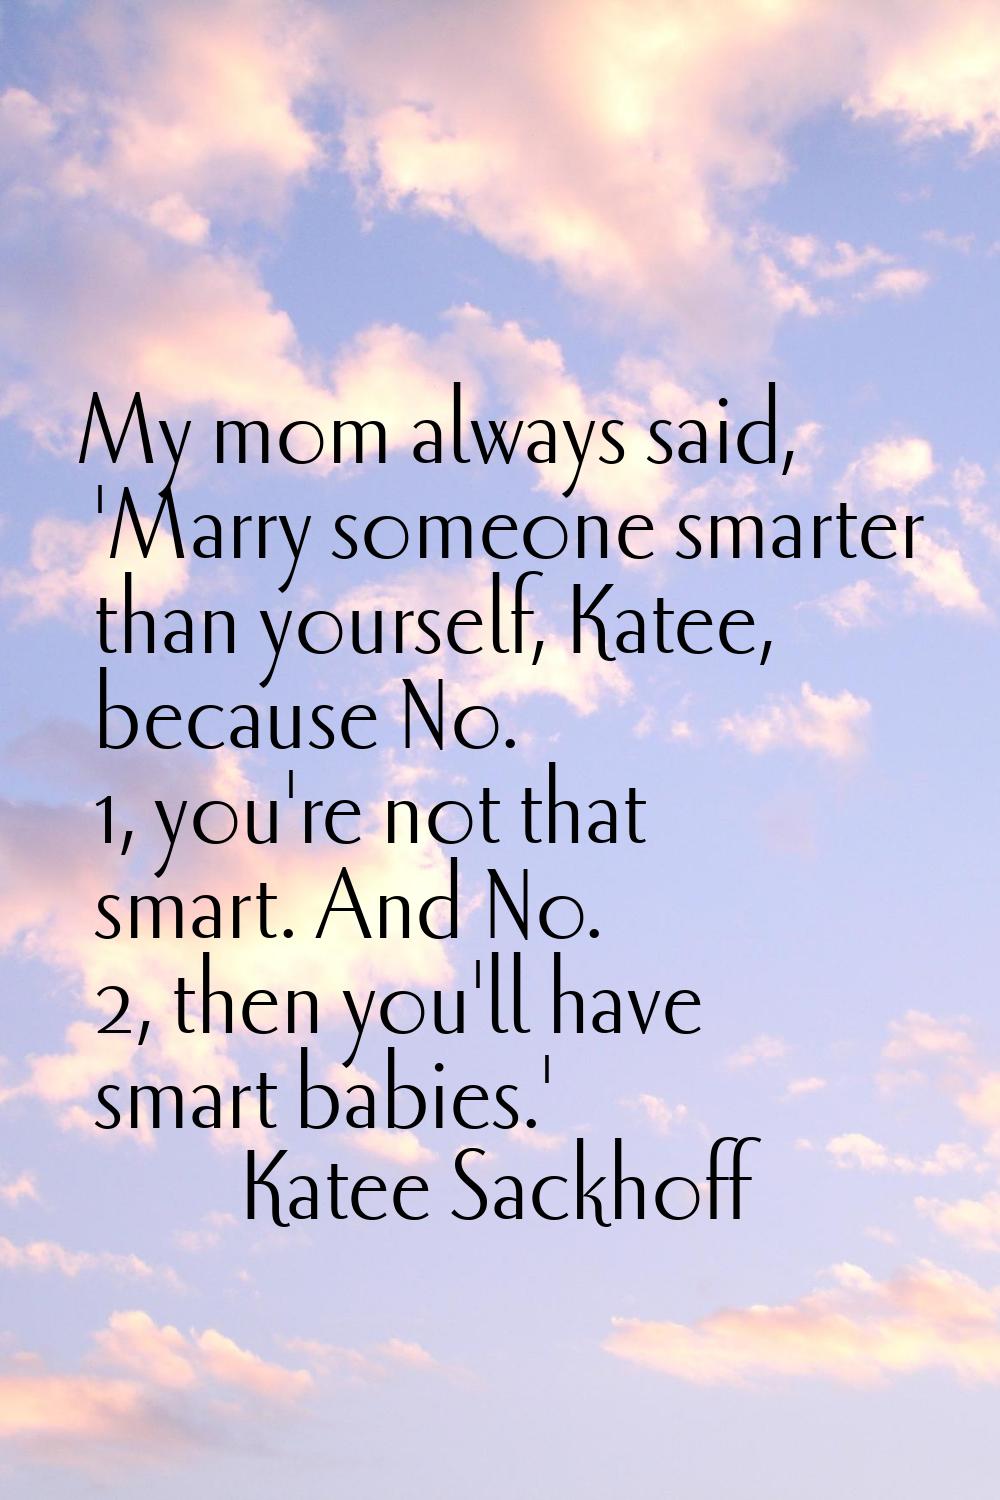 My mom always said, 'Marry someone smarter than yourself, Katee, because No. 1, you're not that sma